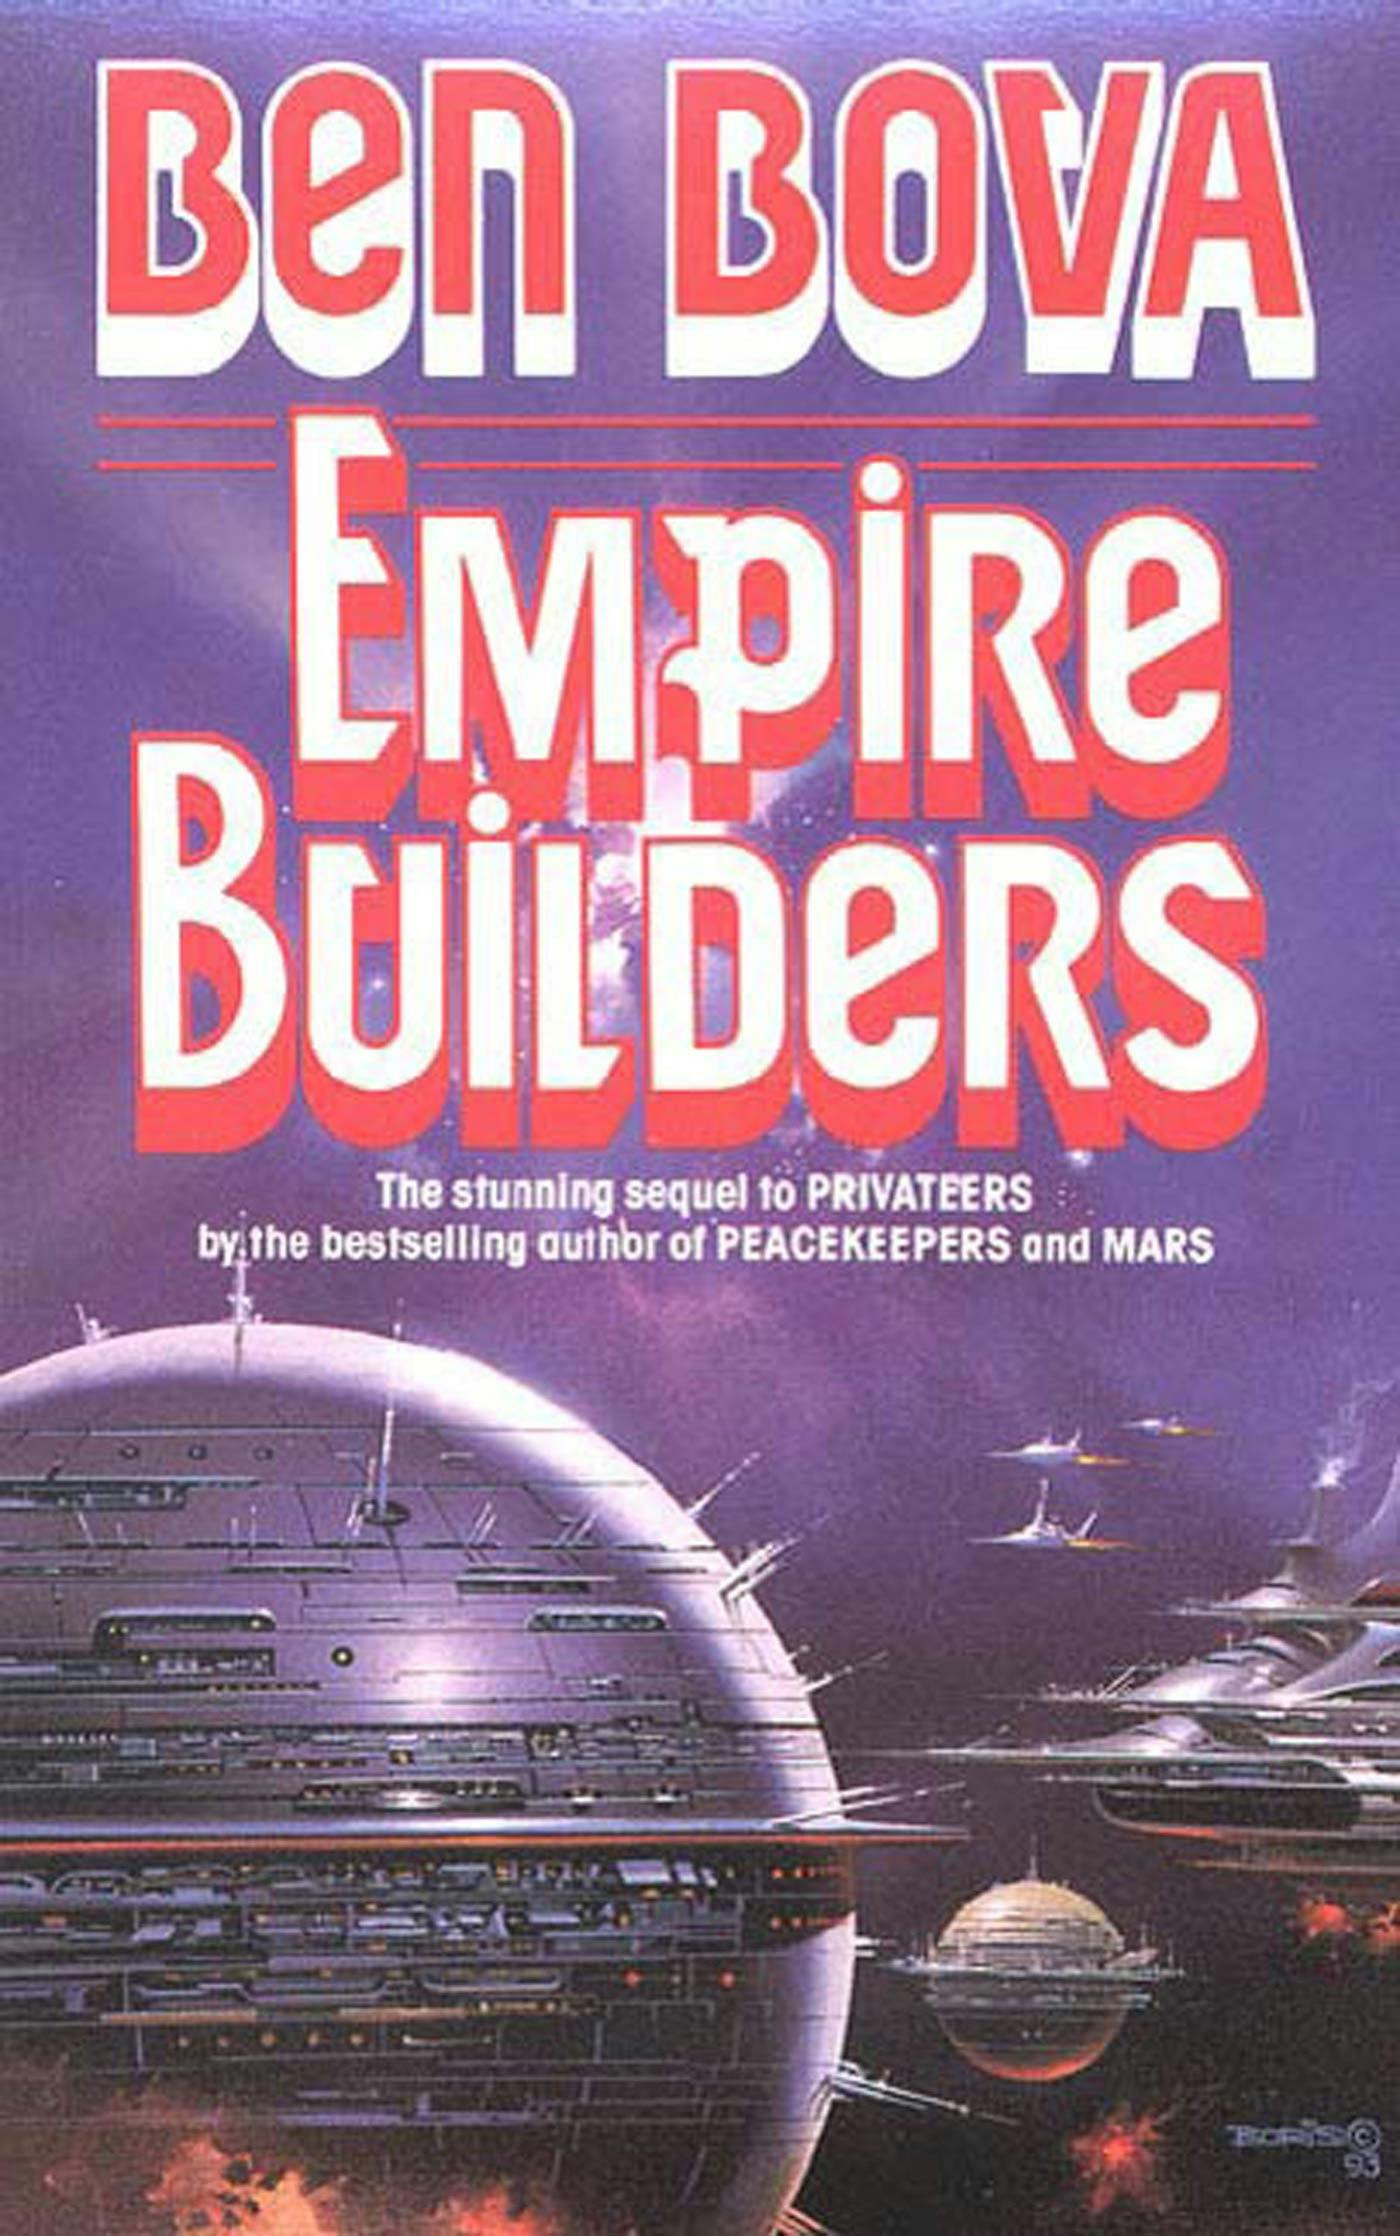 Image of Empire Builders